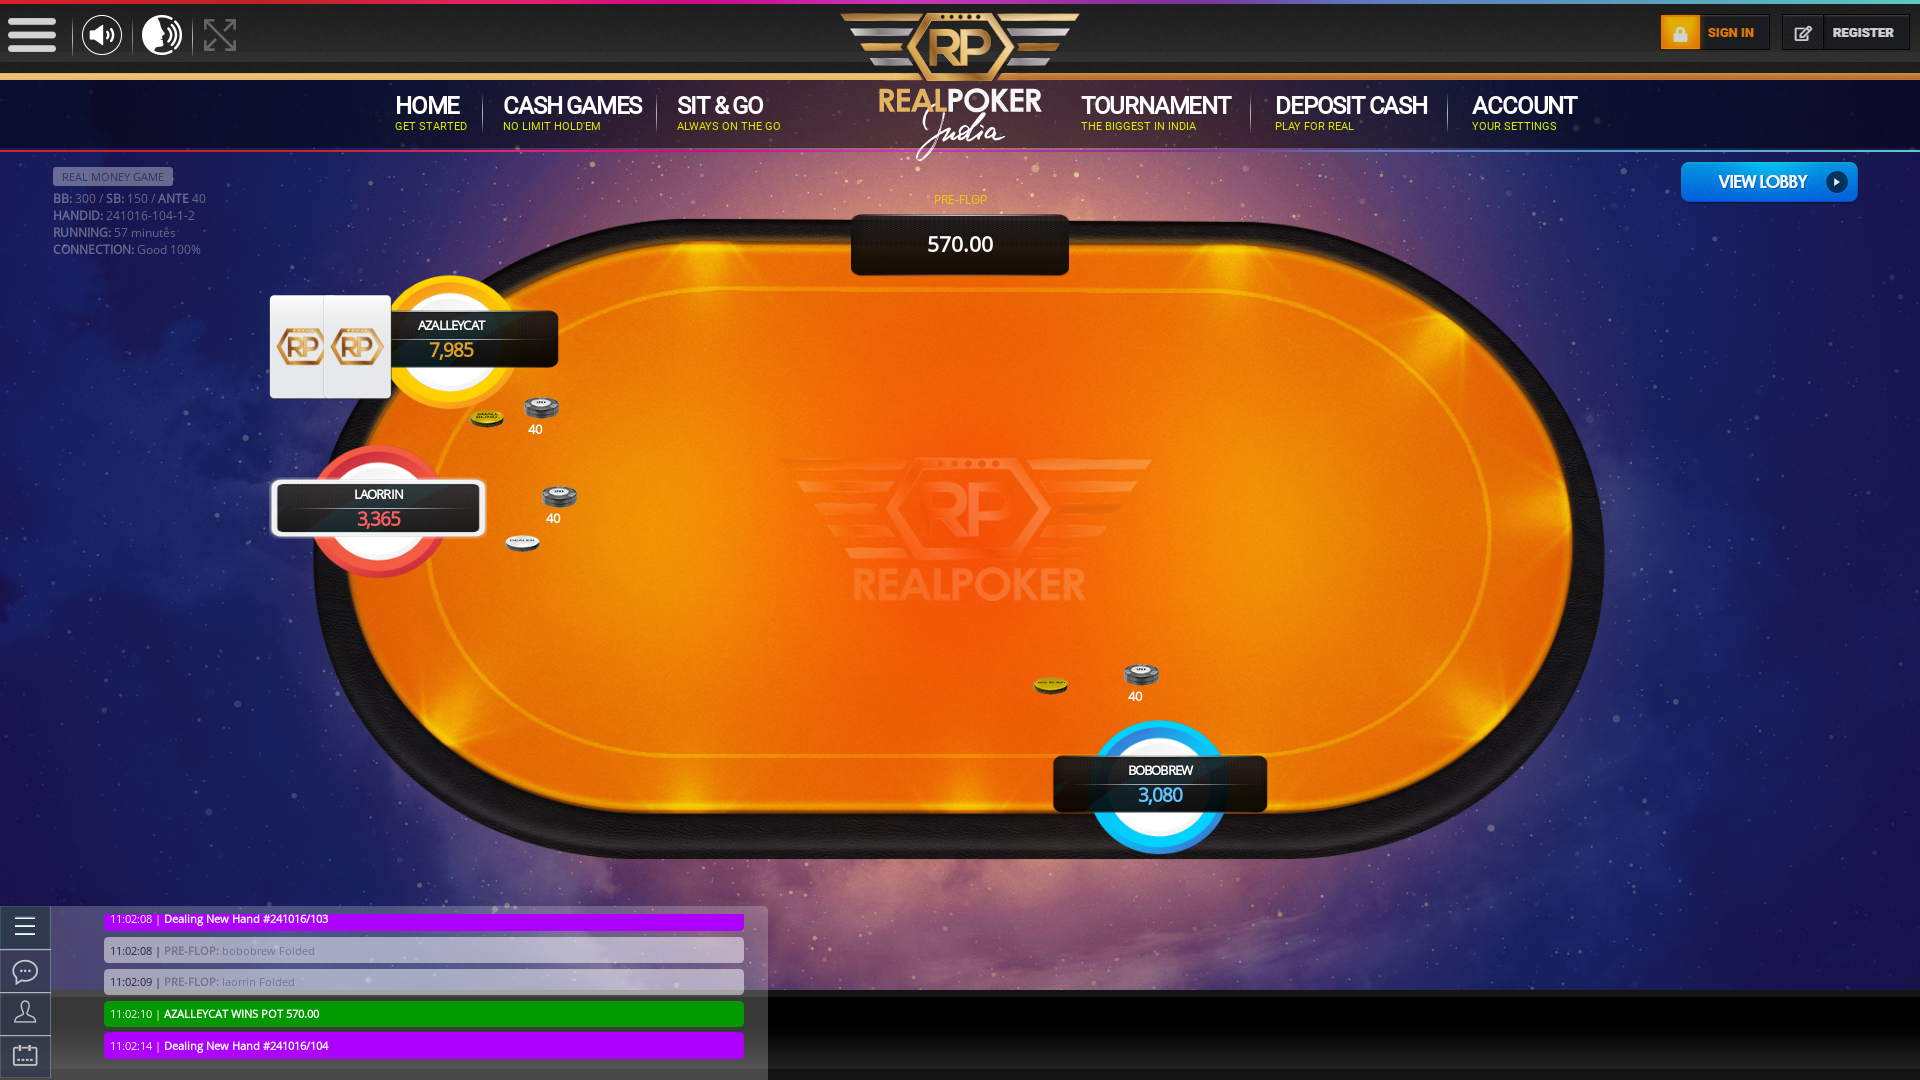 Indian online poker on a 10 player table in the 56th minute match up